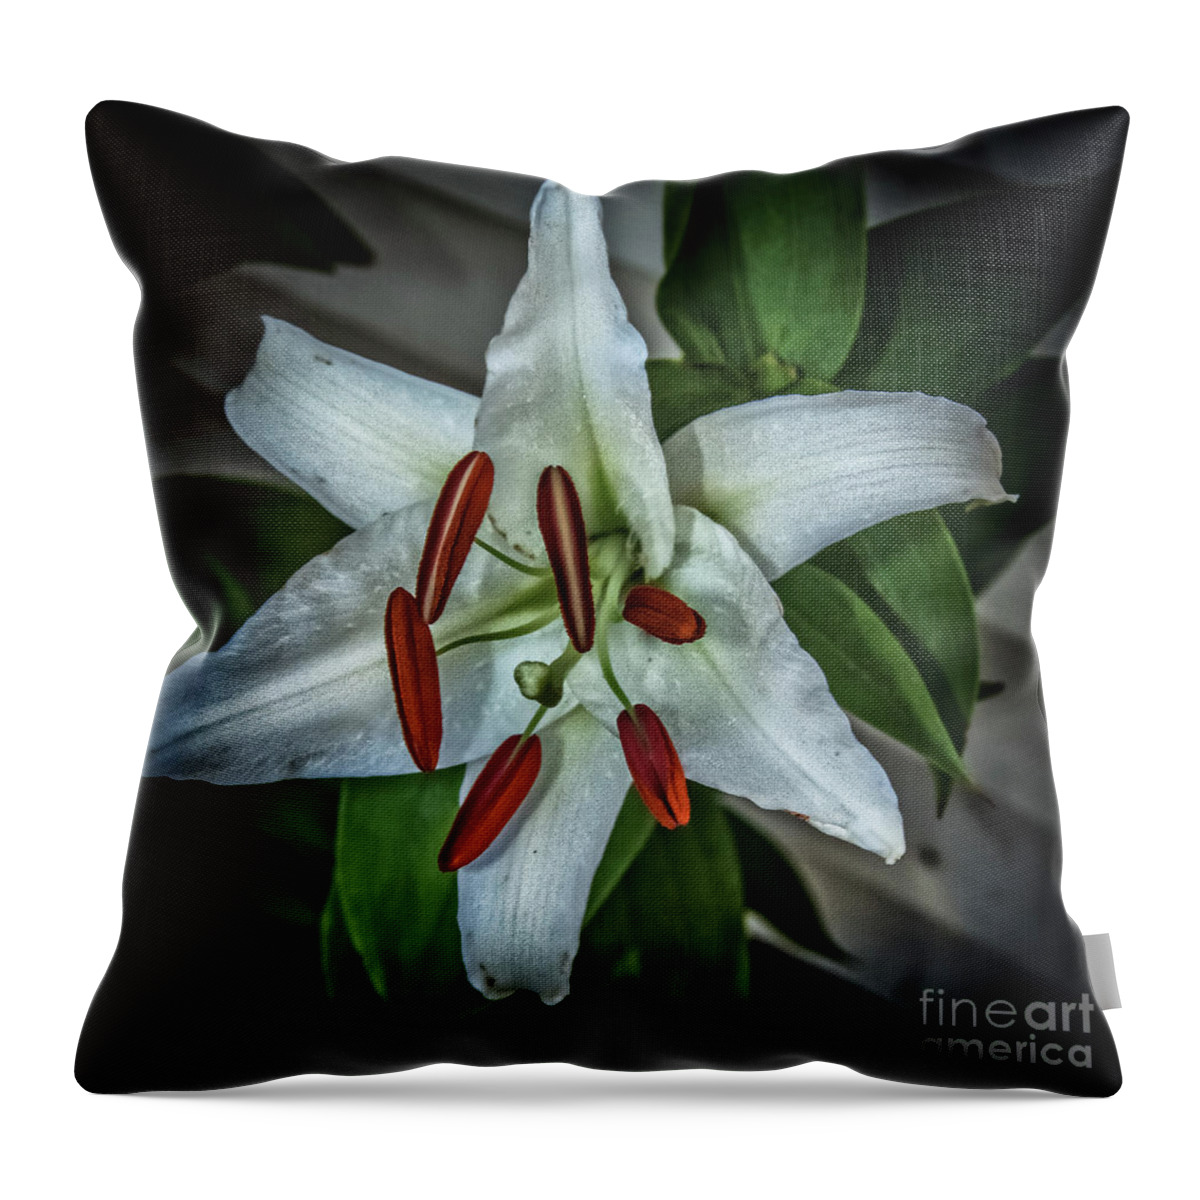 Isolated Throw Pillow featuring the photograph White Lily by Robert Bales